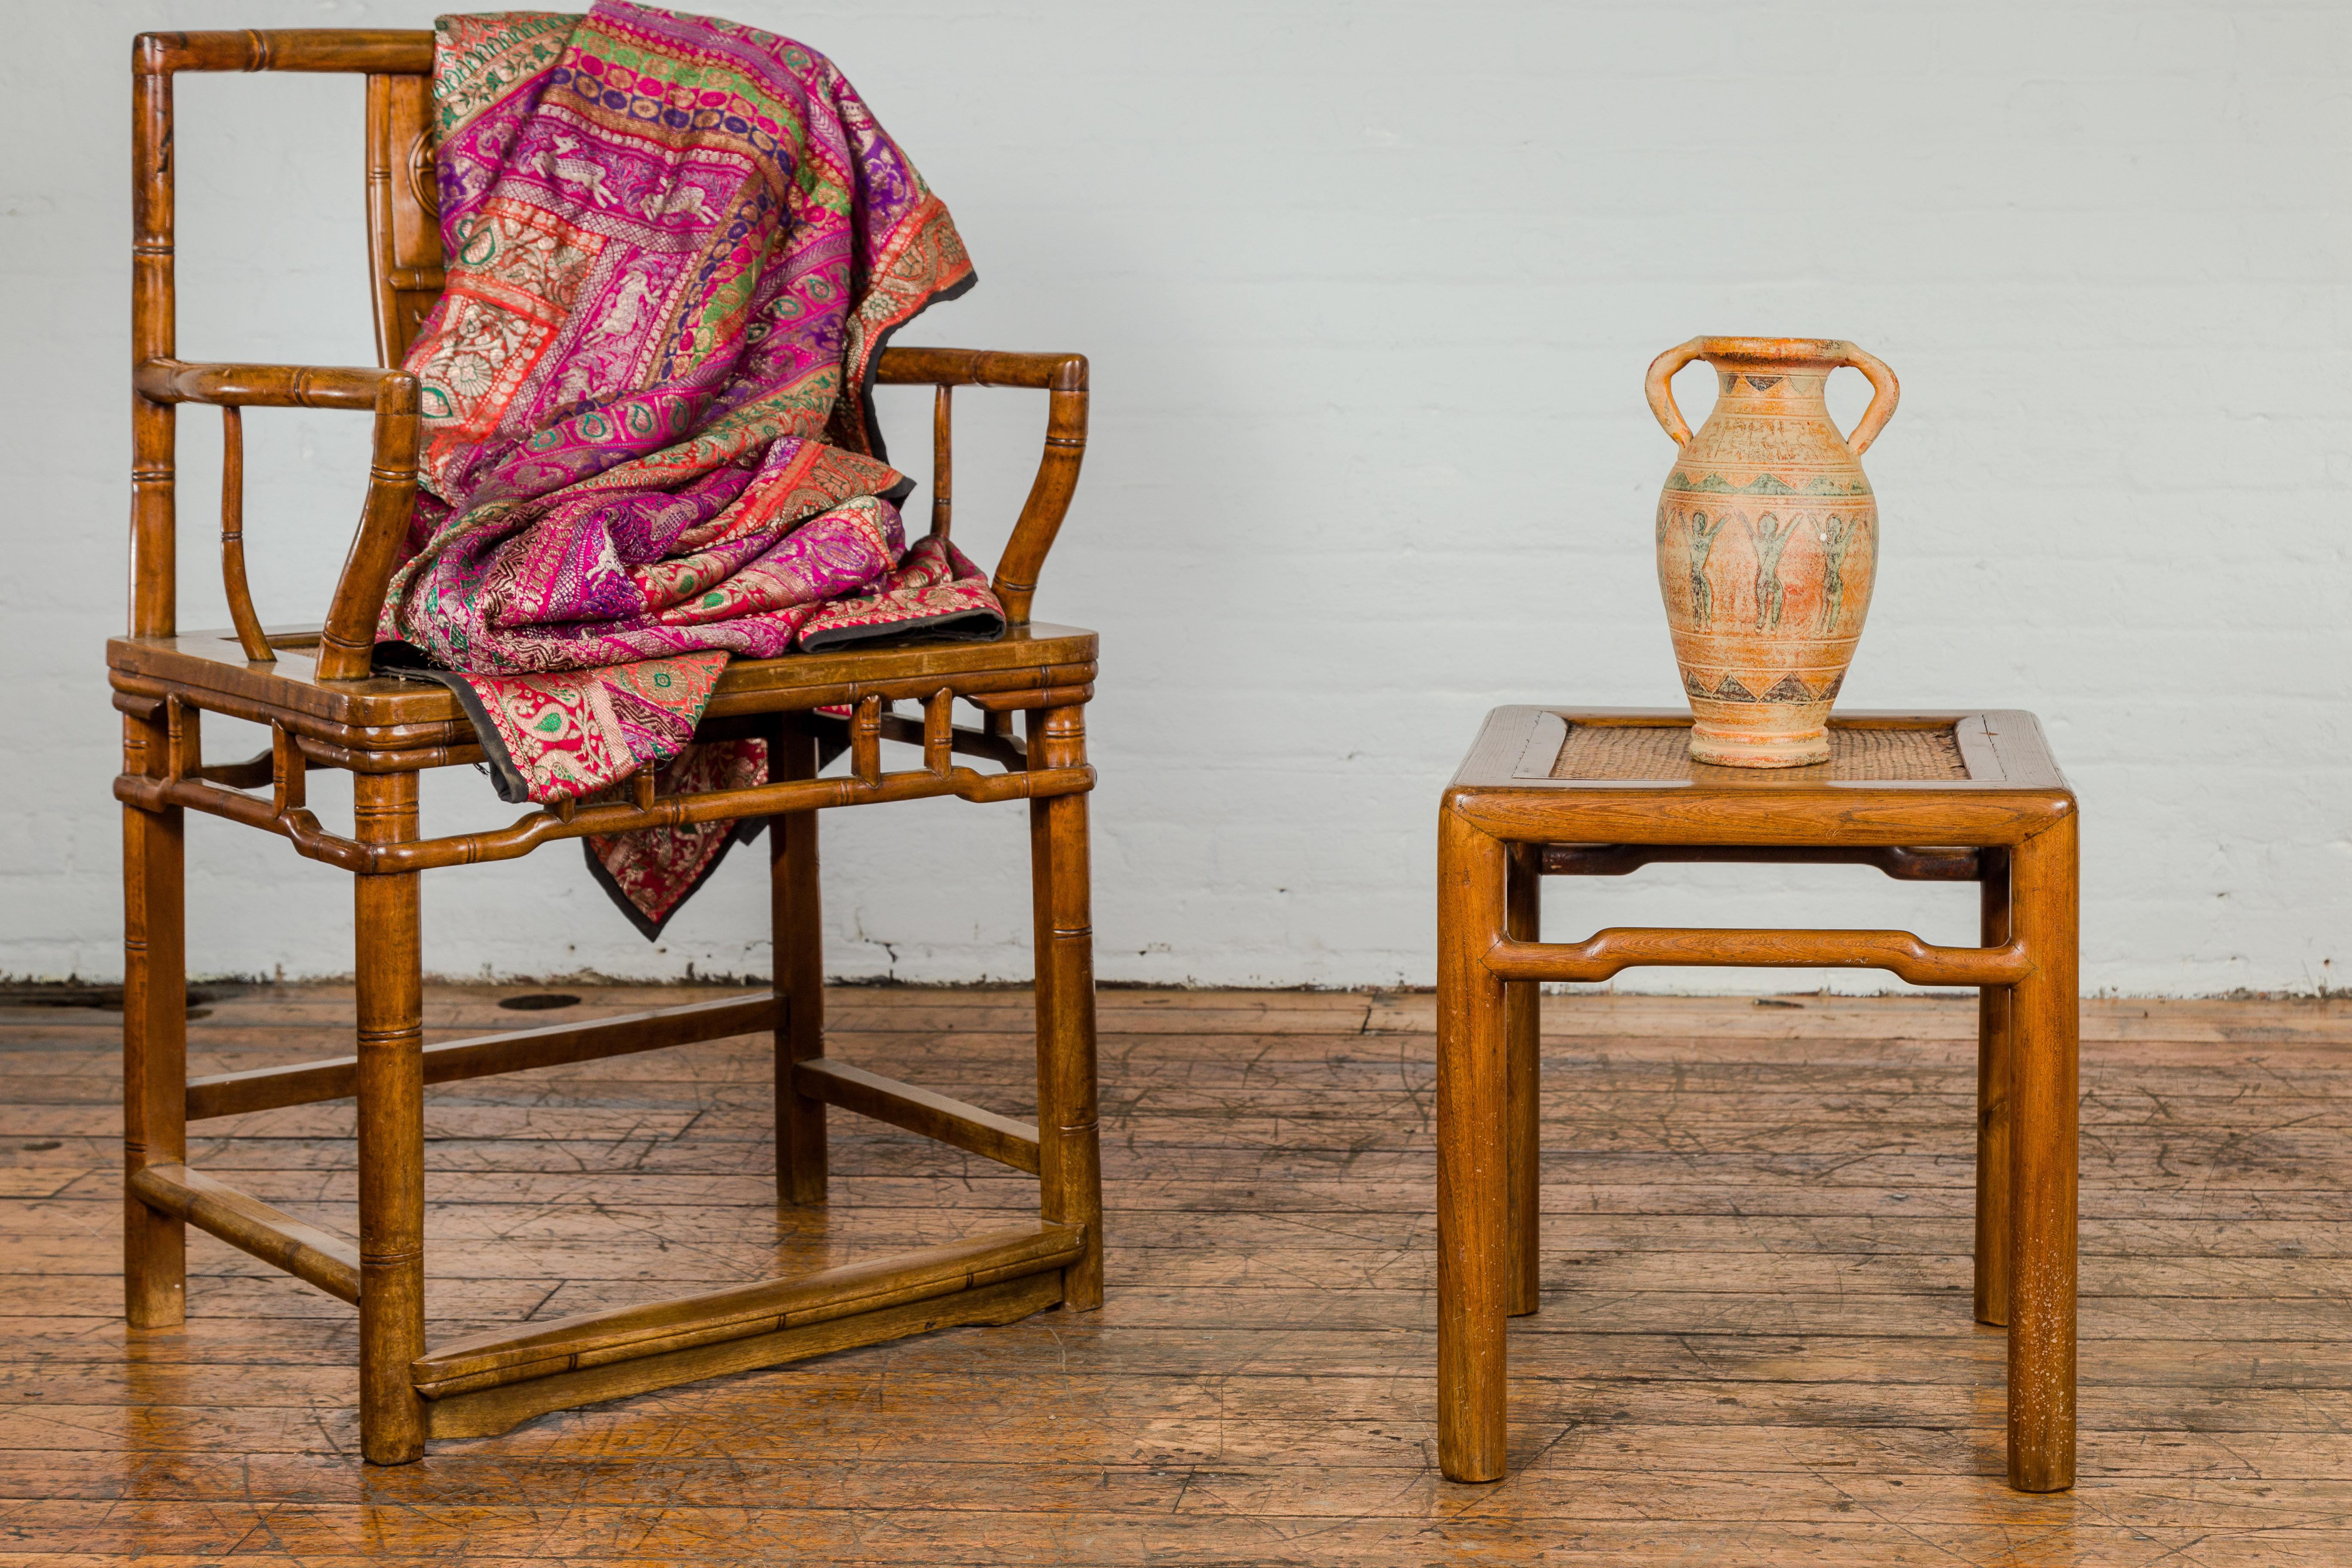 A late Qing Dynasty period small square shaped side table from the early 20th century with rattan insert at the top, humpback stretchers on all sides and cylindrical legs. Imbue your home with a touch of the orient through this late Qing Dynasty